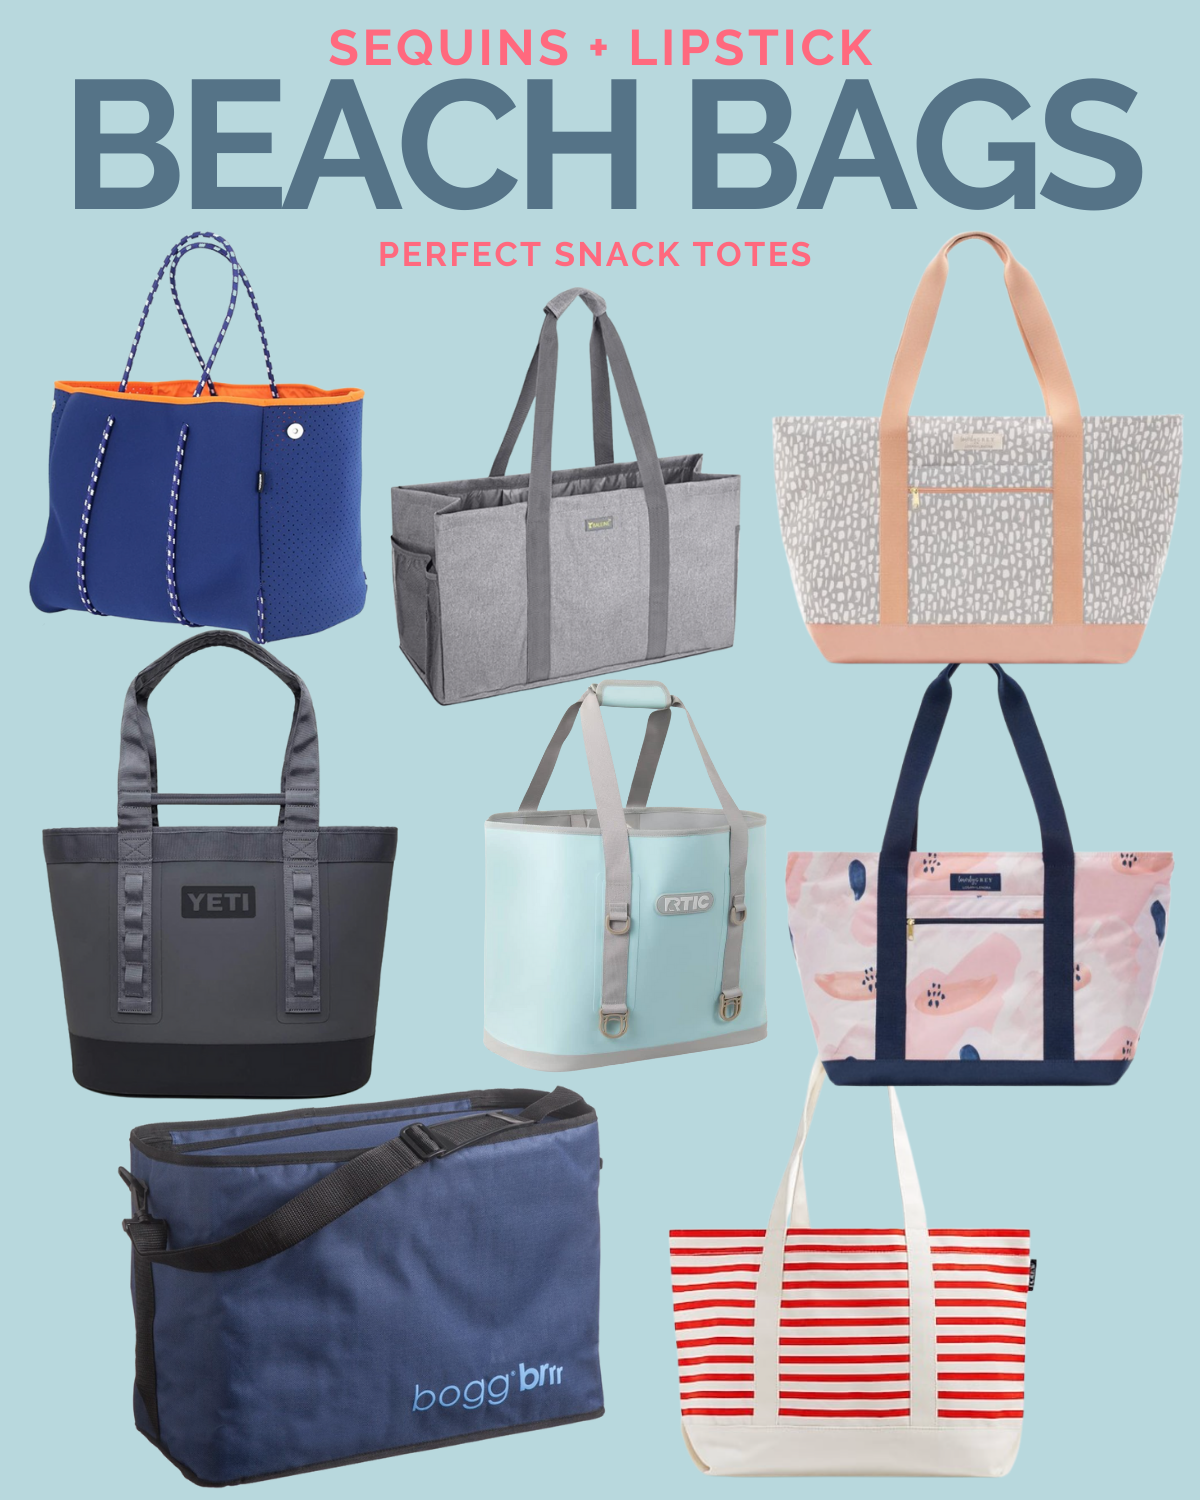 The Best Beach Bags and Pool Totes: Comparing Bogg Bags and Simple